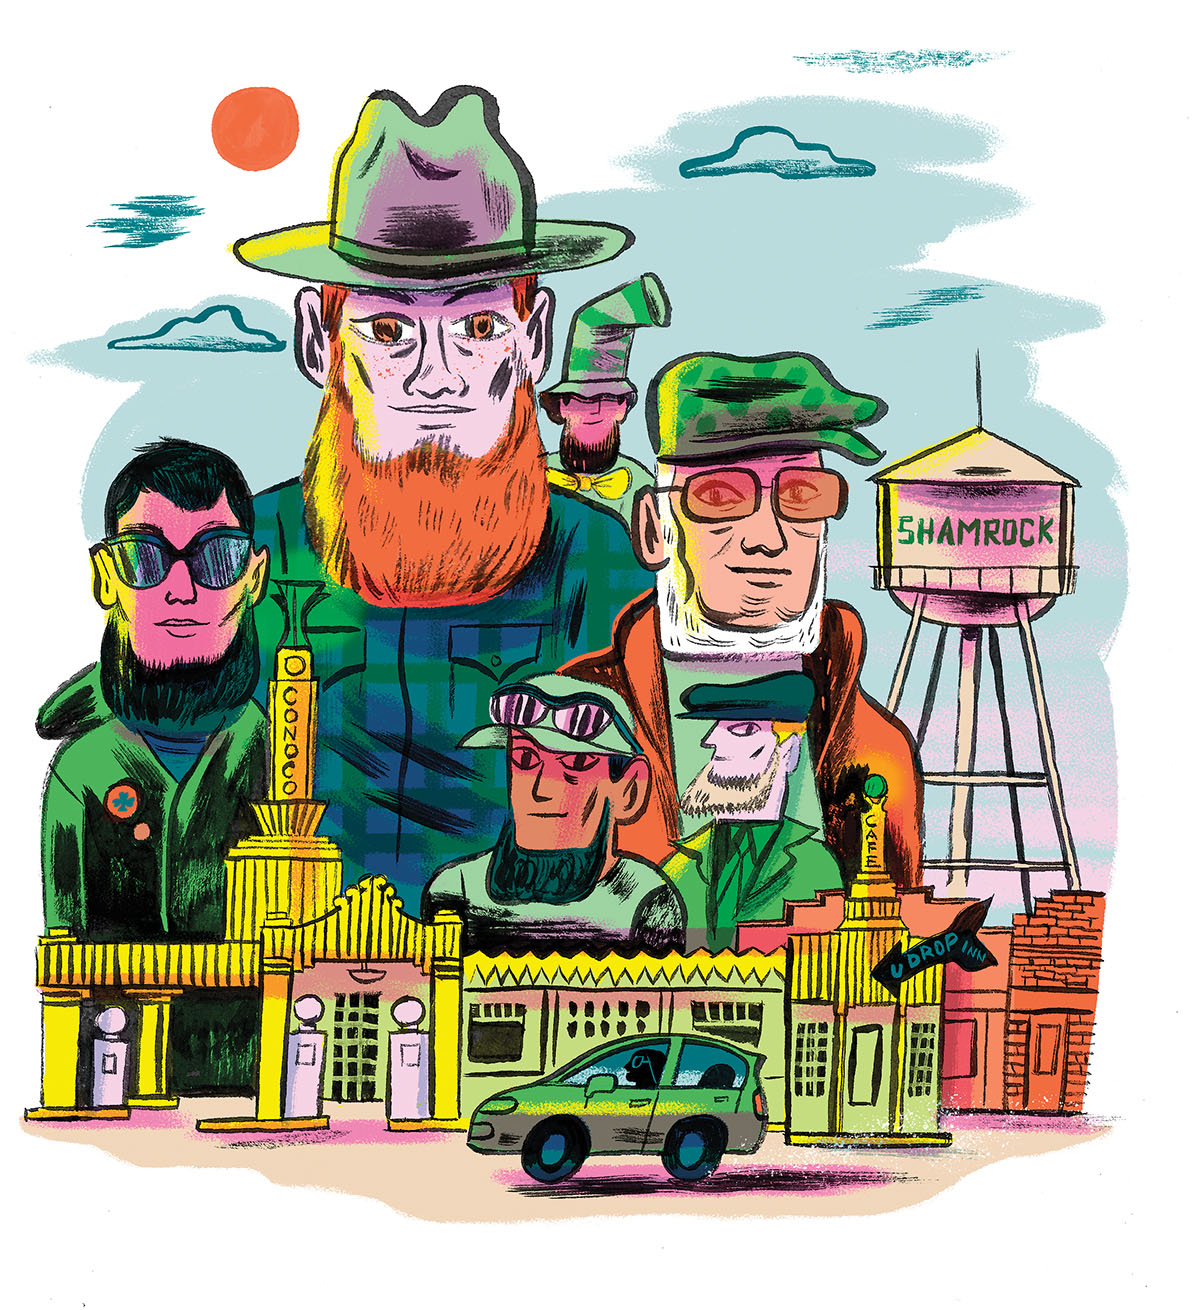 An illustration of people with large beards in Shamrock, Texas